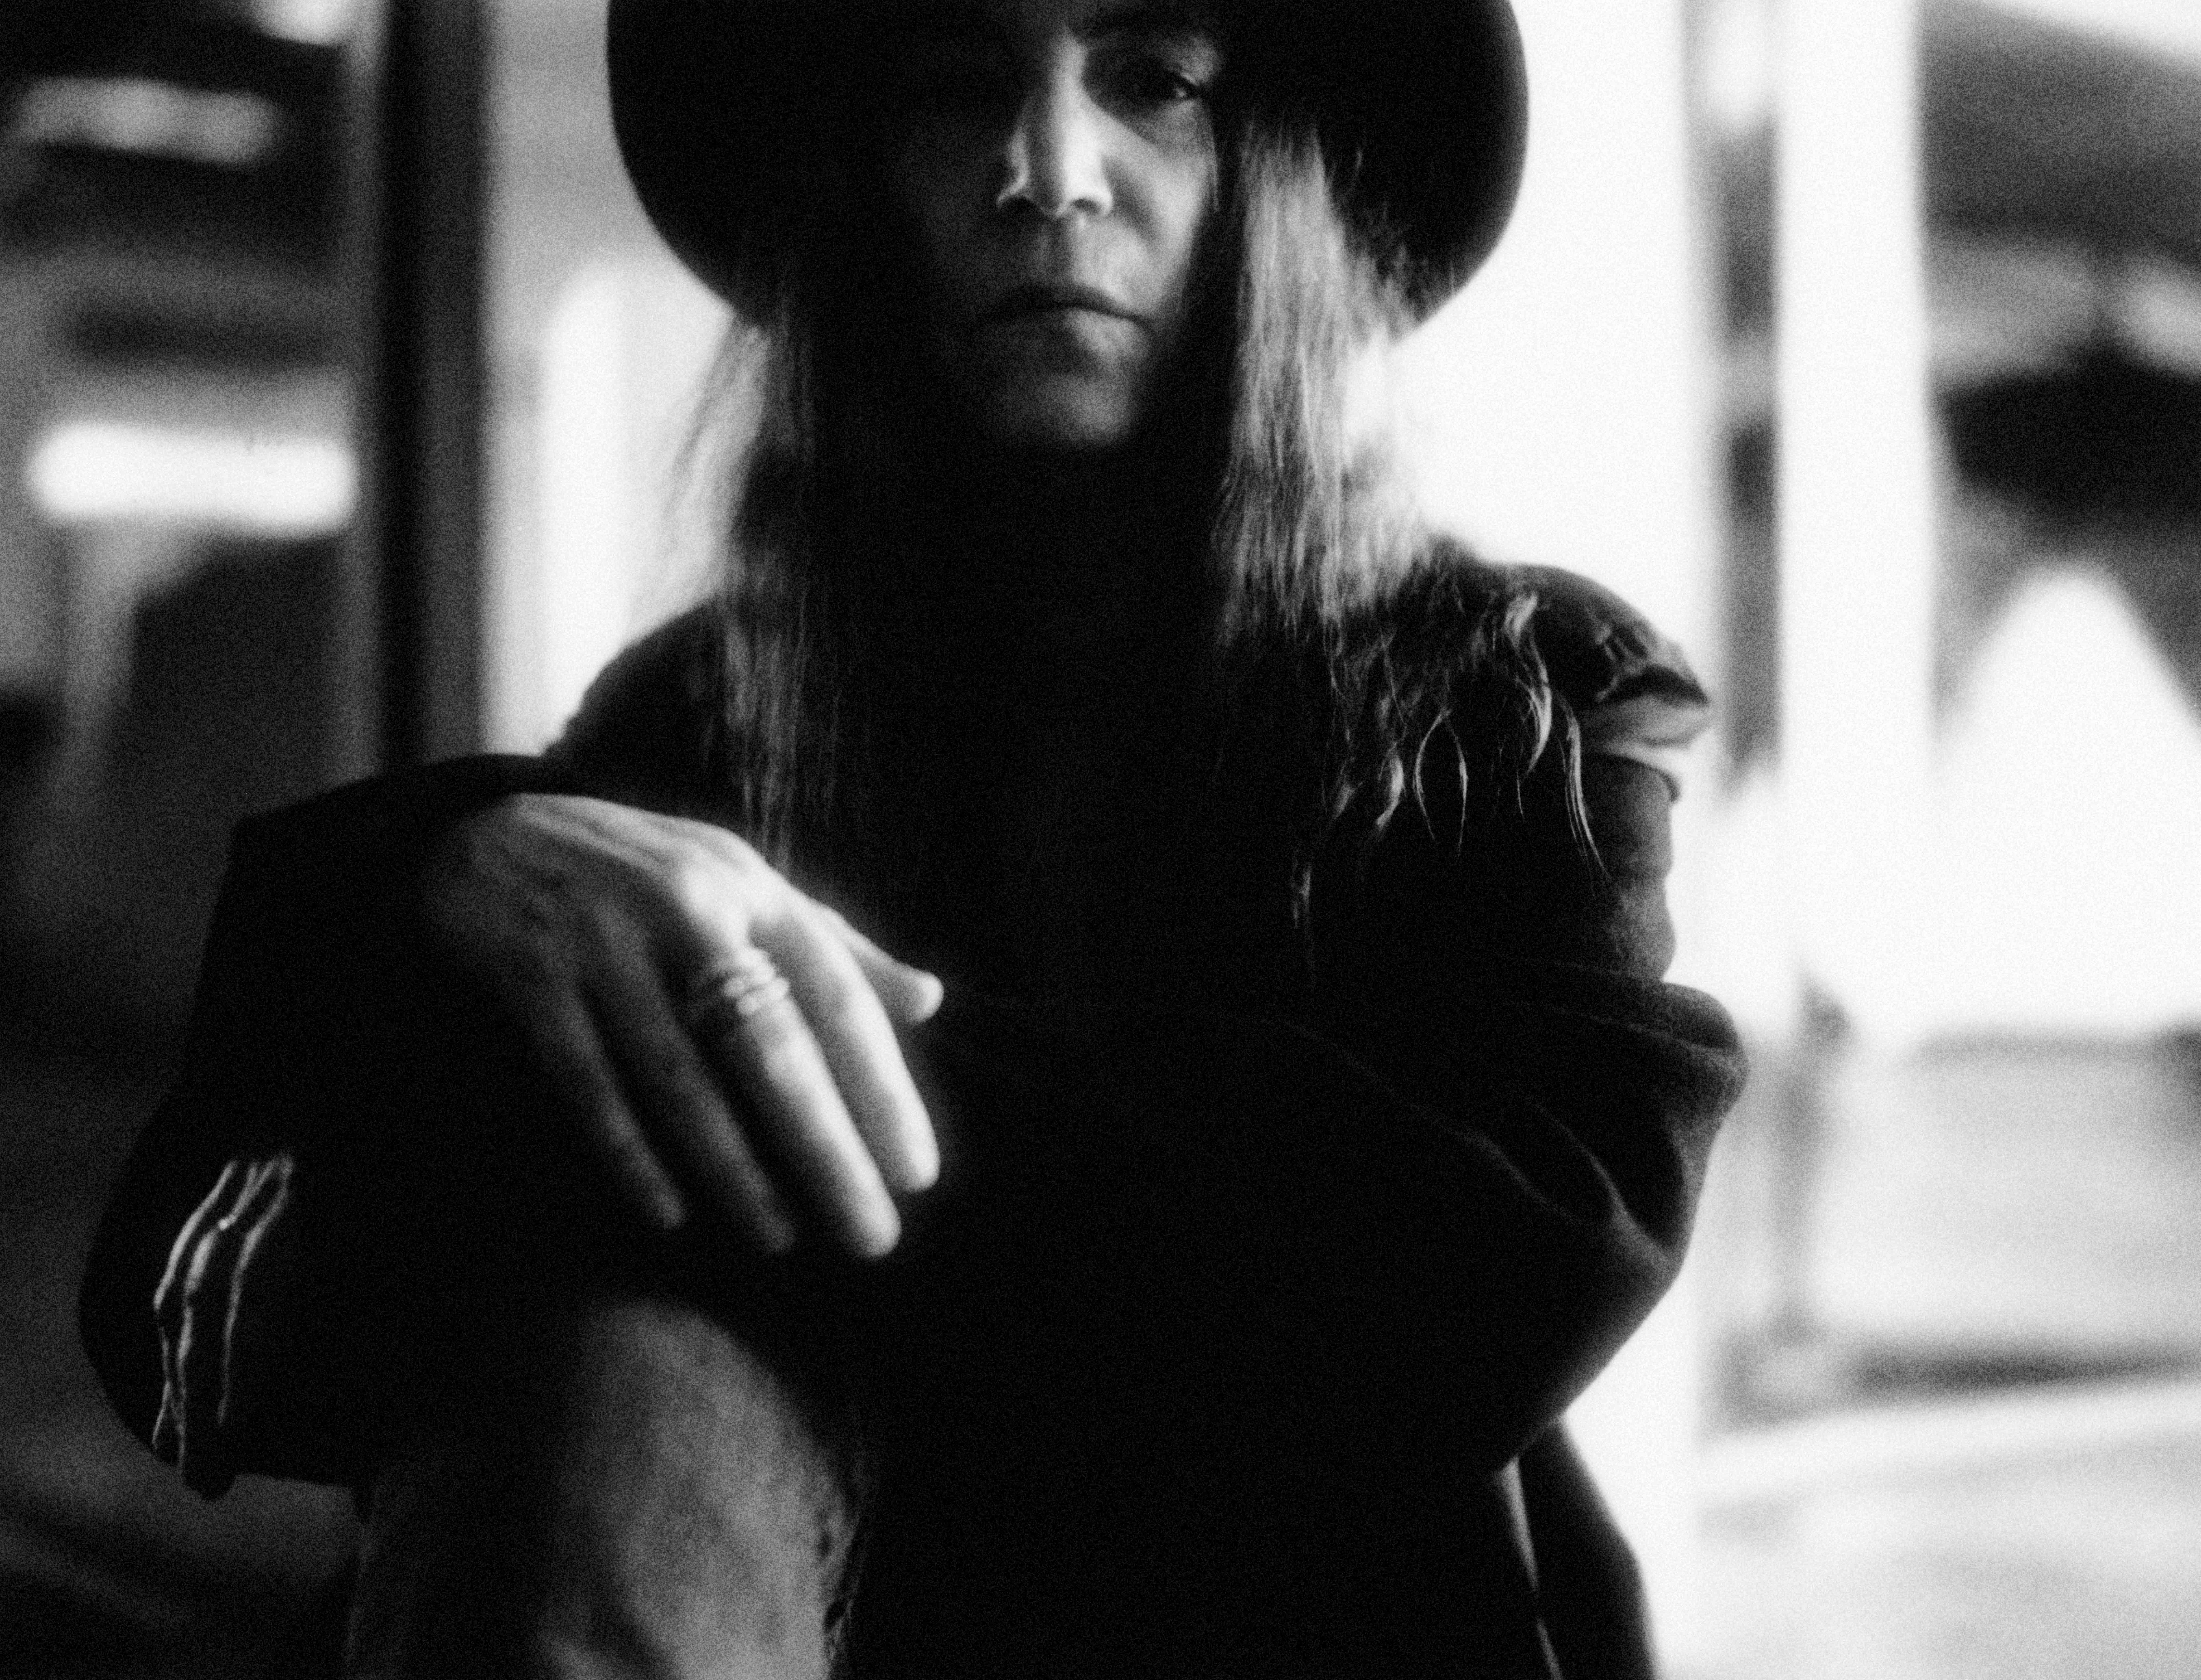 Any way you look at it, Patti Smith is a legend. As